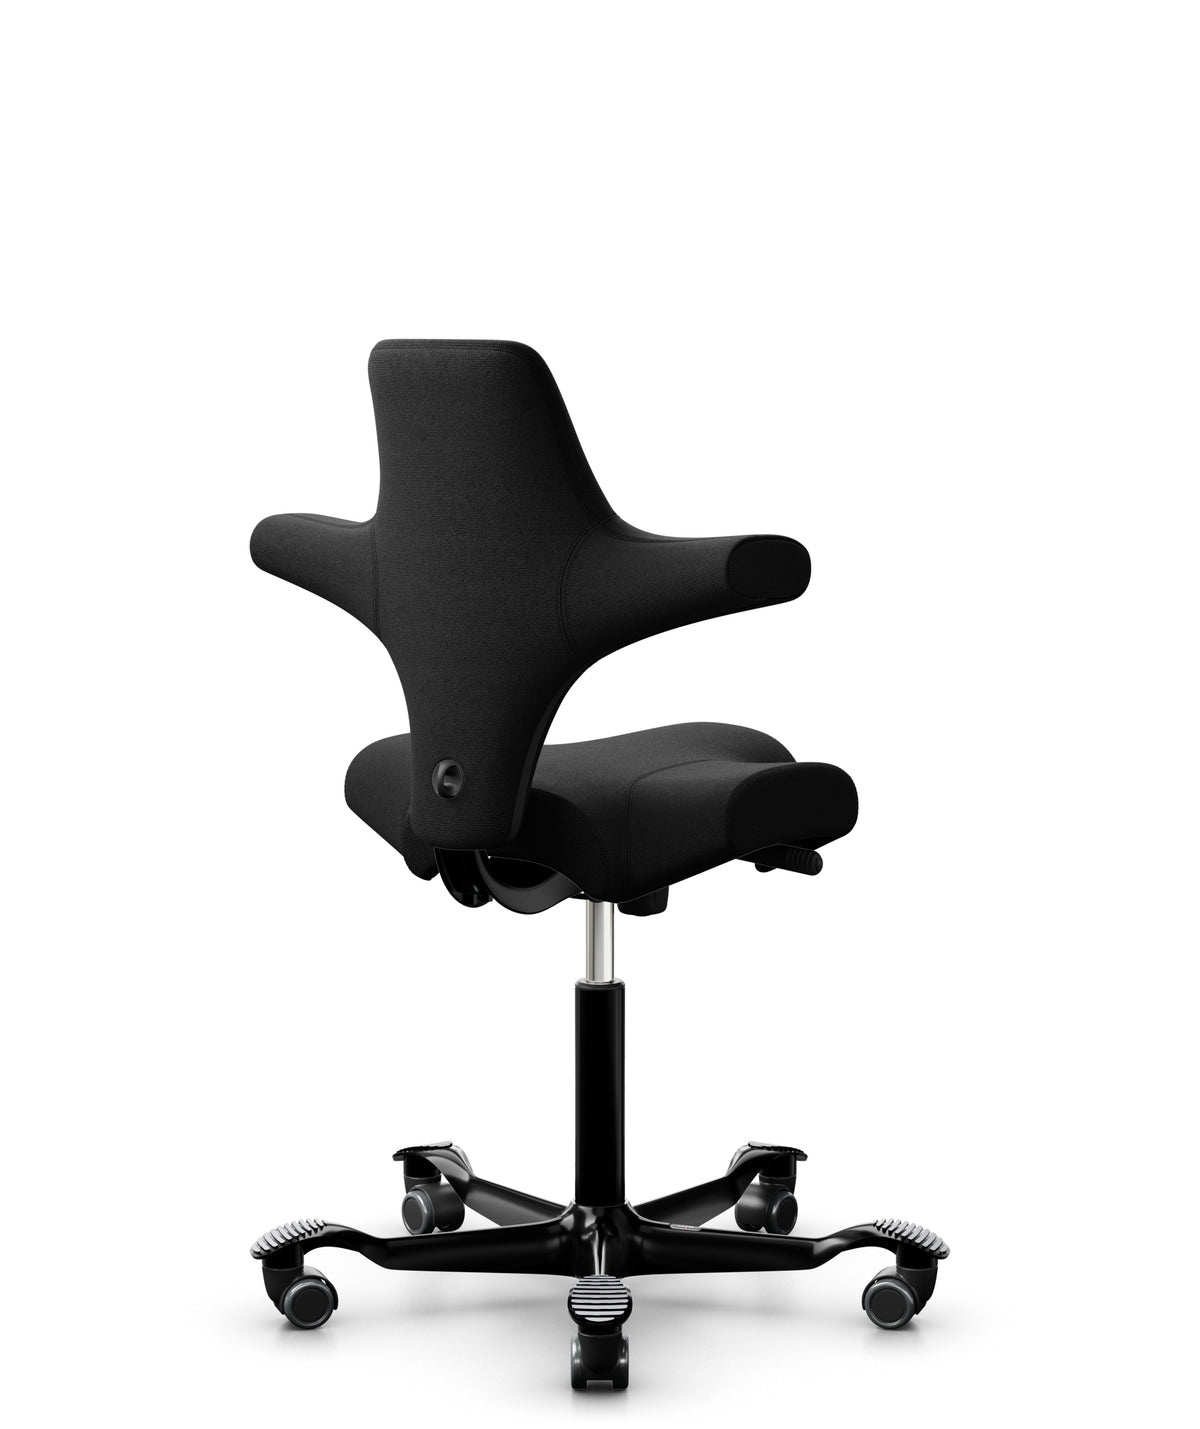 HÅG Capisco 8106 Ergonomic Office Chair with Optional High Seat and Footring Black